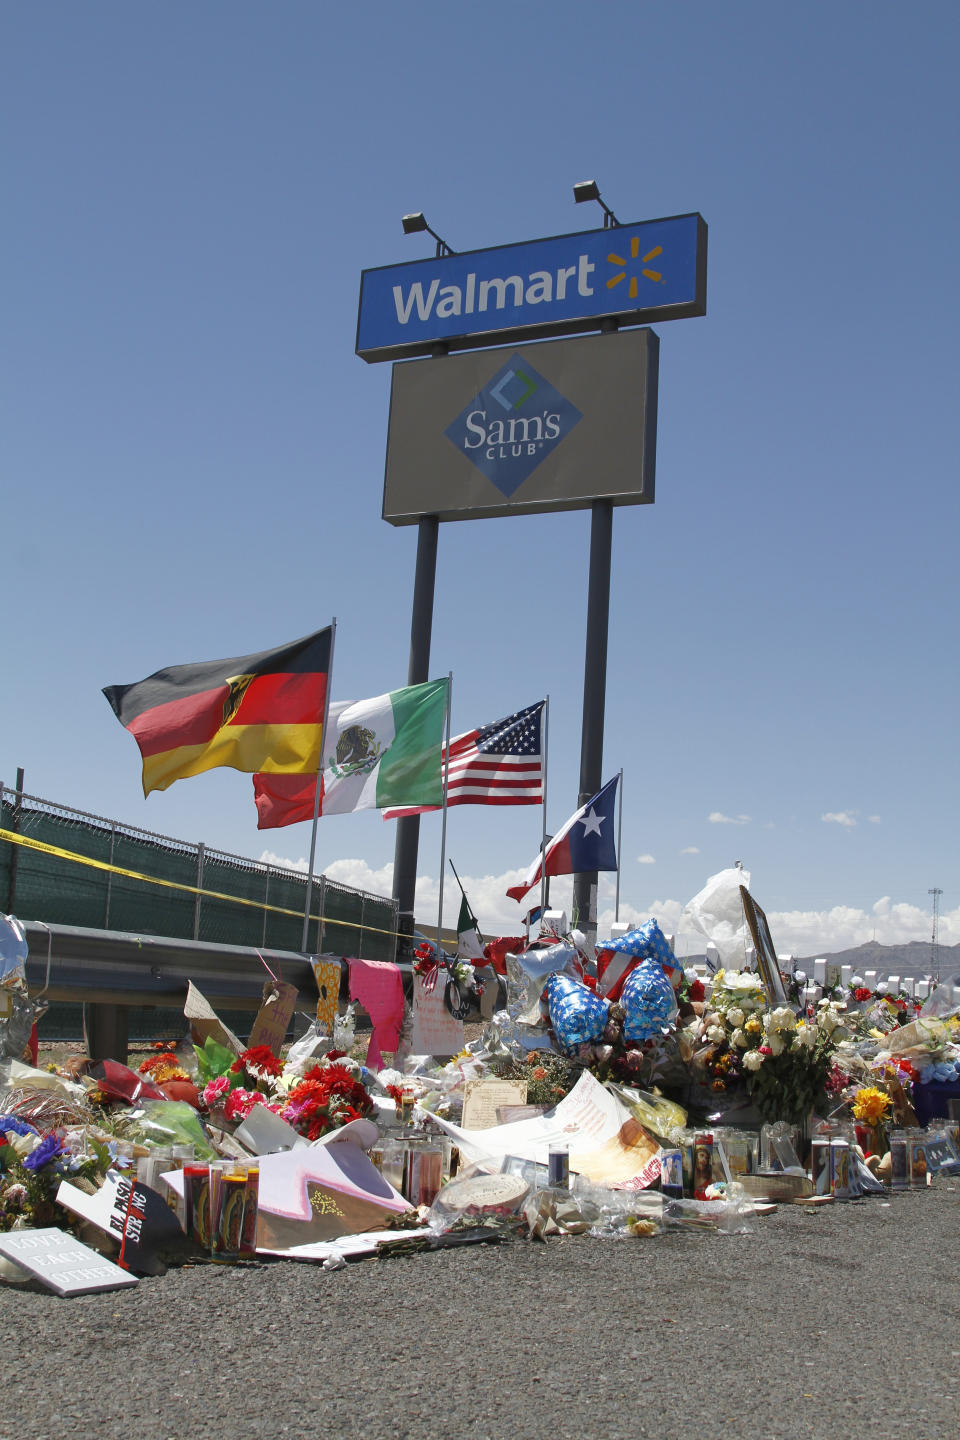 In this Aug. 12, 2019 photo, mourners visit the makeshift memorial near the Walmart in El Paso, Texas, where 22 people were killed in a mass shooting that police are investigating as a terrorist attack targeting Latinos. The flags show the nationalities of those killed in the attack, including a German man who lived in nearby Ciudad Juarez, Mexico. On Thursday, Aug. 22, 2019, Walmart said it plans to reopen the El Paso store where 22 people were killed in a mass shooting, but the entire interior of the building will first be rebuilt. (AP Photo/Cedar Attanasio)